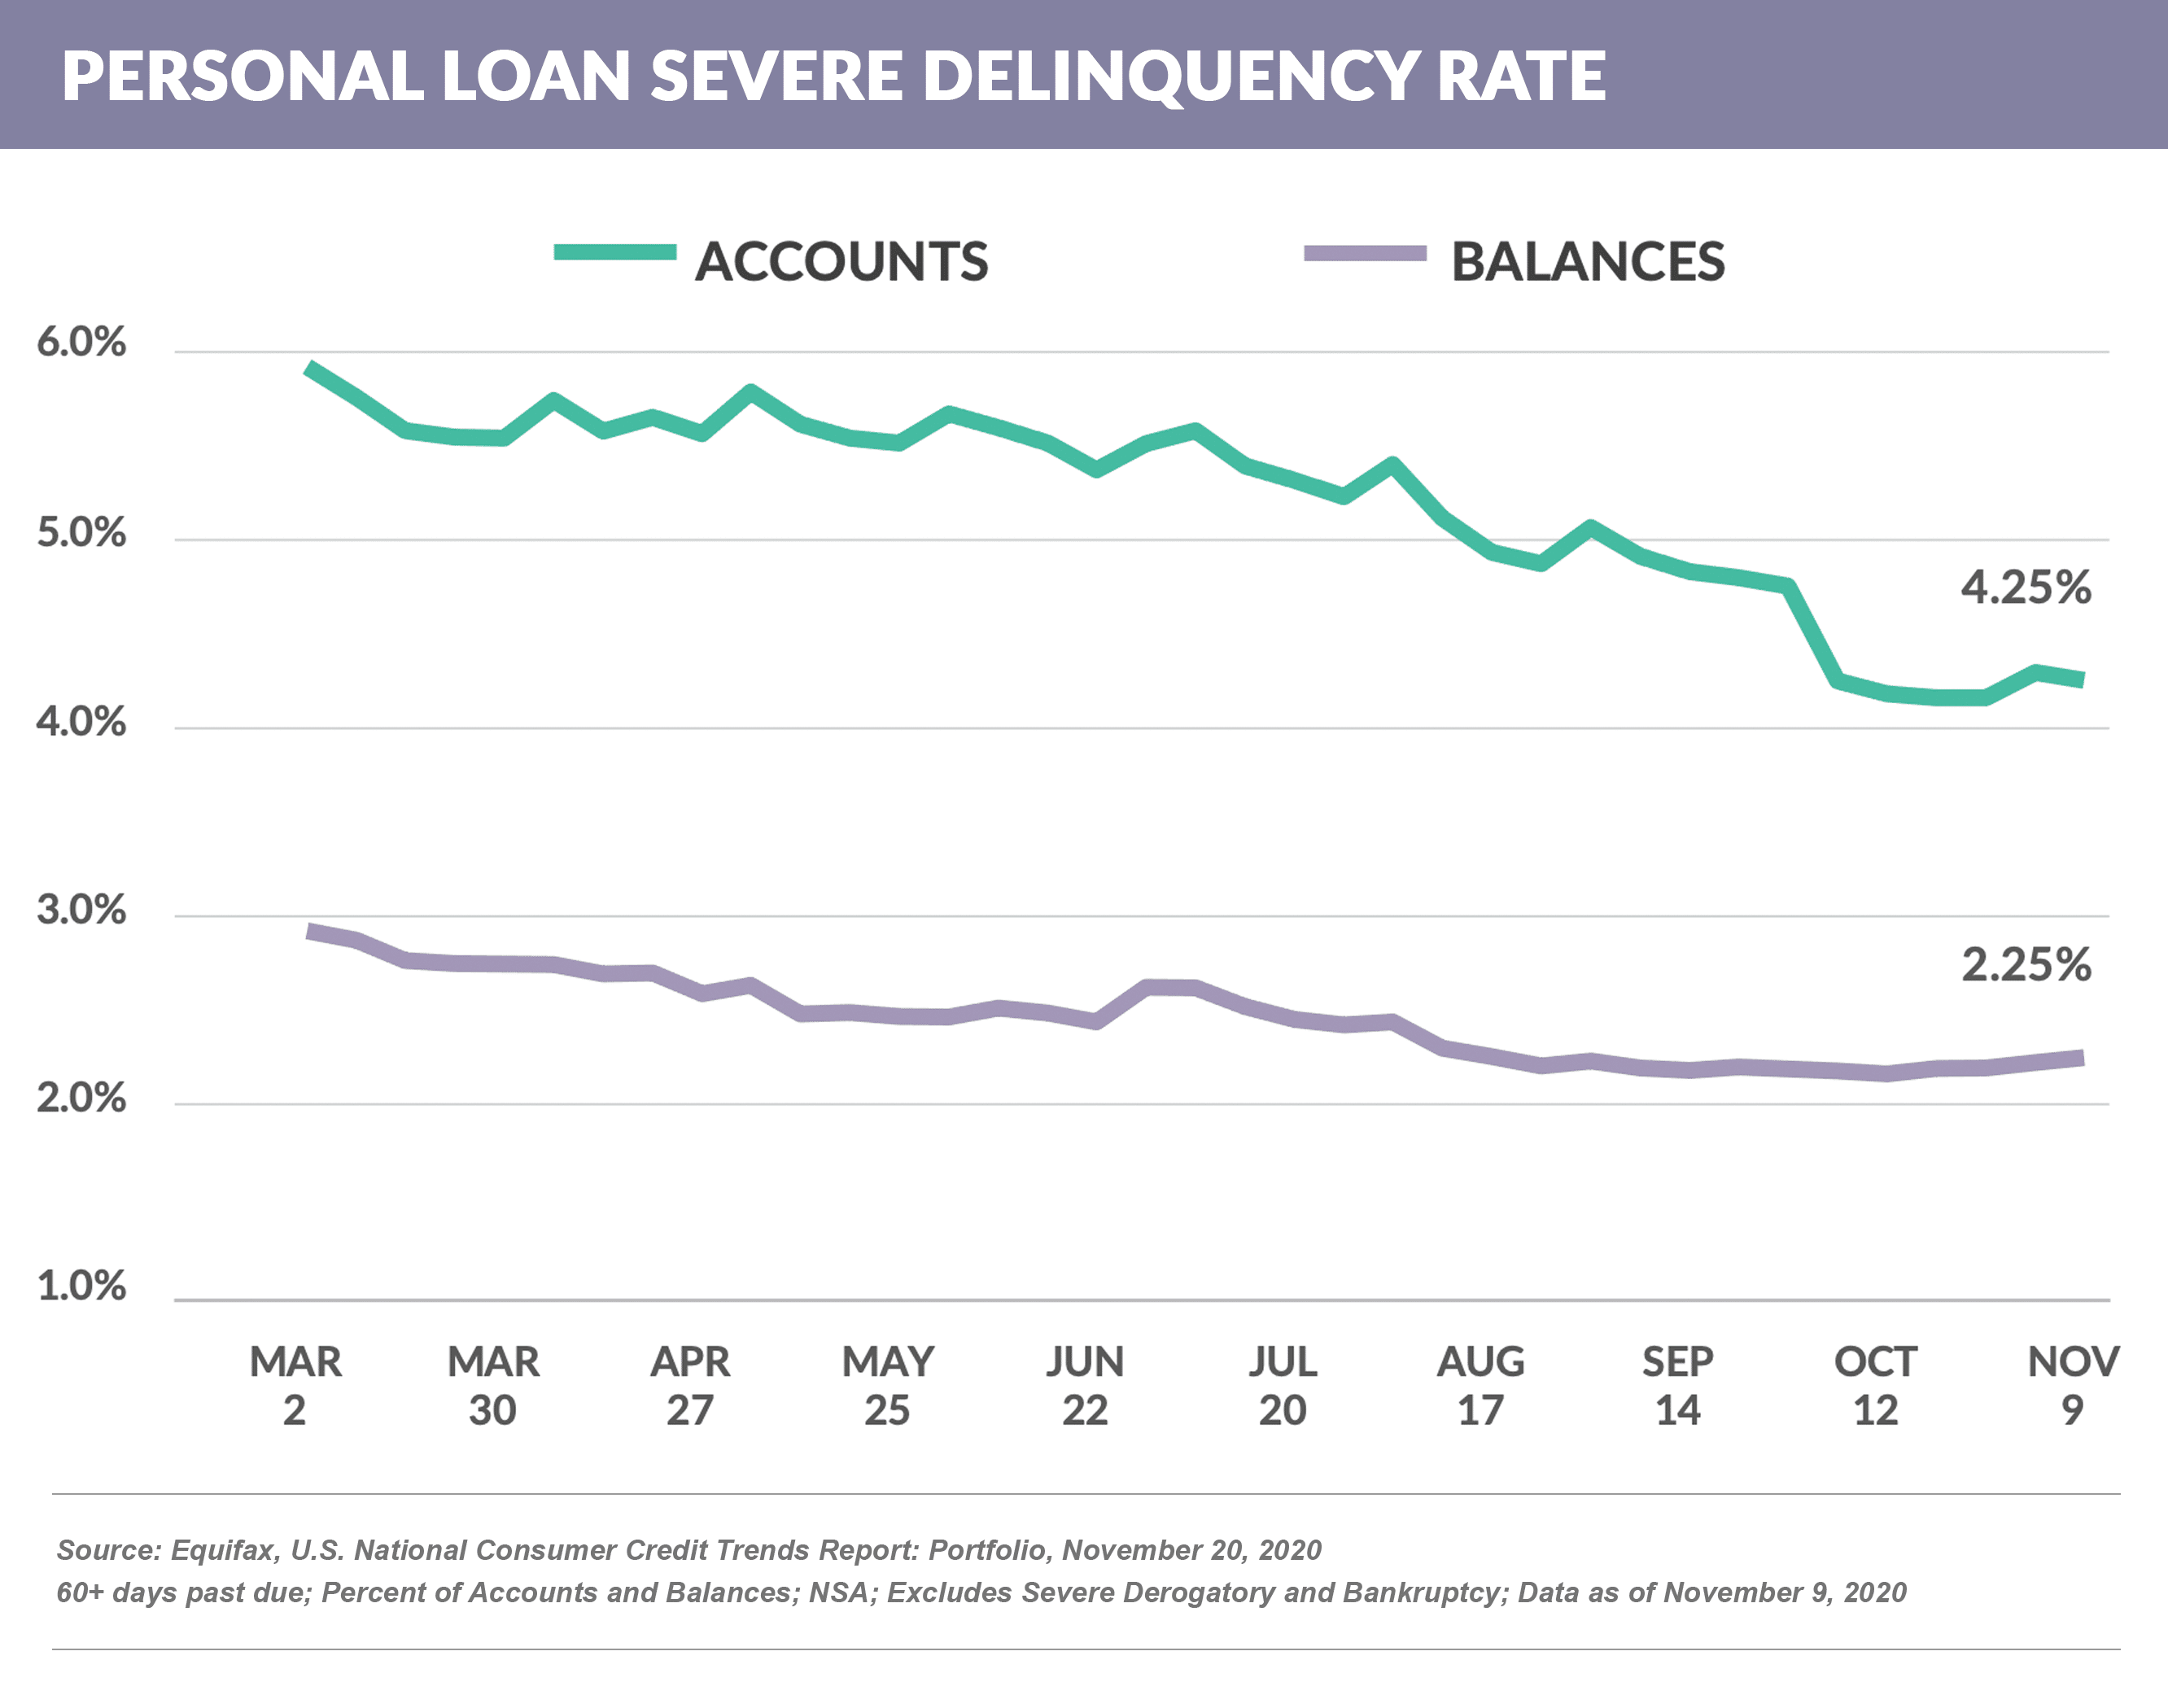 Bankcard Severe Delinquency Rate 20201109 (1)